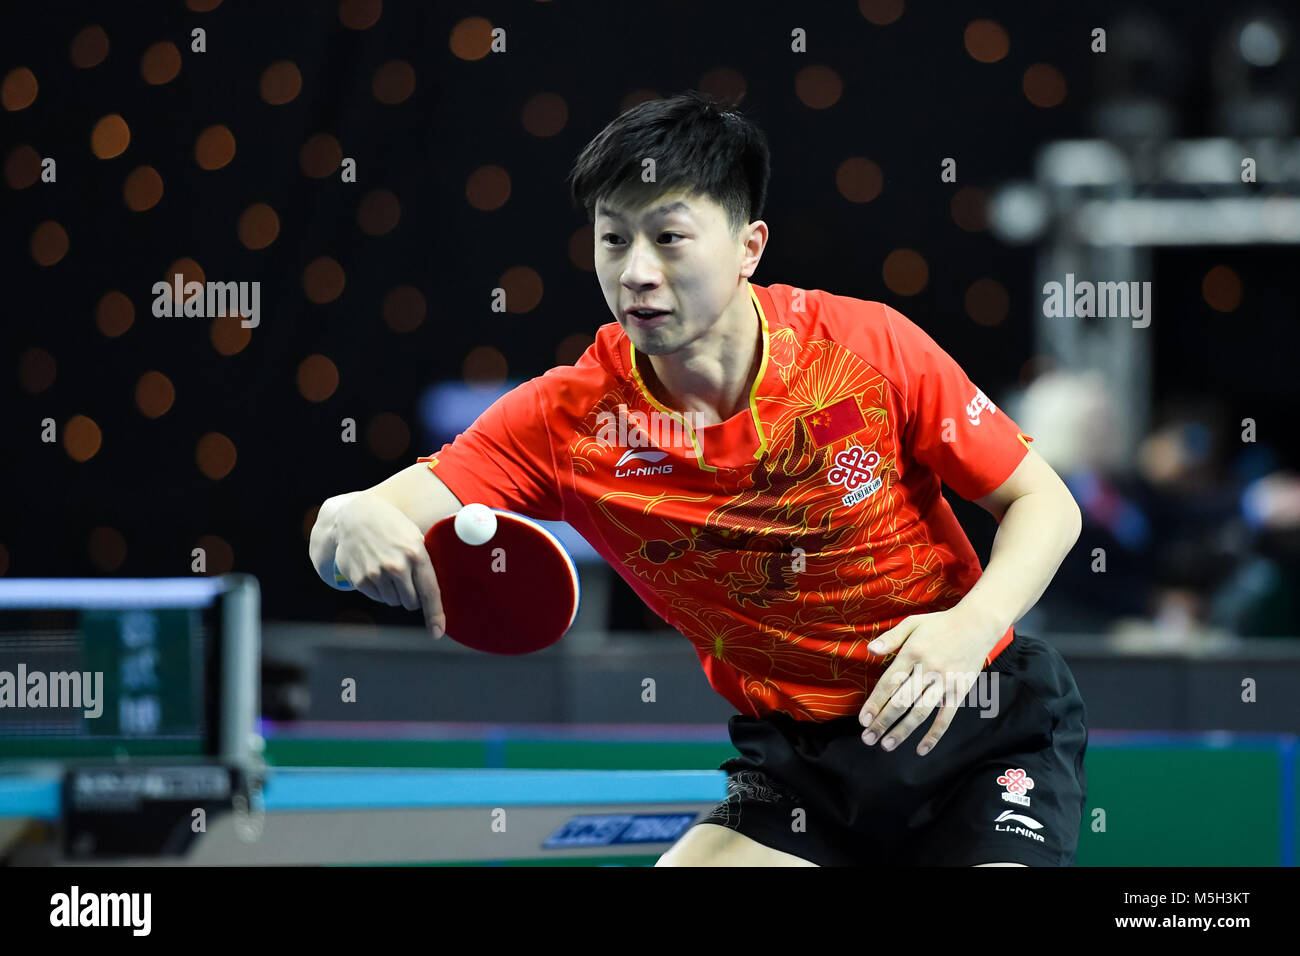 London, UK. 23rd Feb, 2018. Ma Long of China  during International Table Tennis Federation Team World Cup match between Ruwen Filus of Germany and Ma Long of China  at Copper Box Arena on Friday, 23 February 2018. LONDON ENGLAND. Credit: Taka G Wu Credit: Taka Wu/Alamy Live News Stock Photo